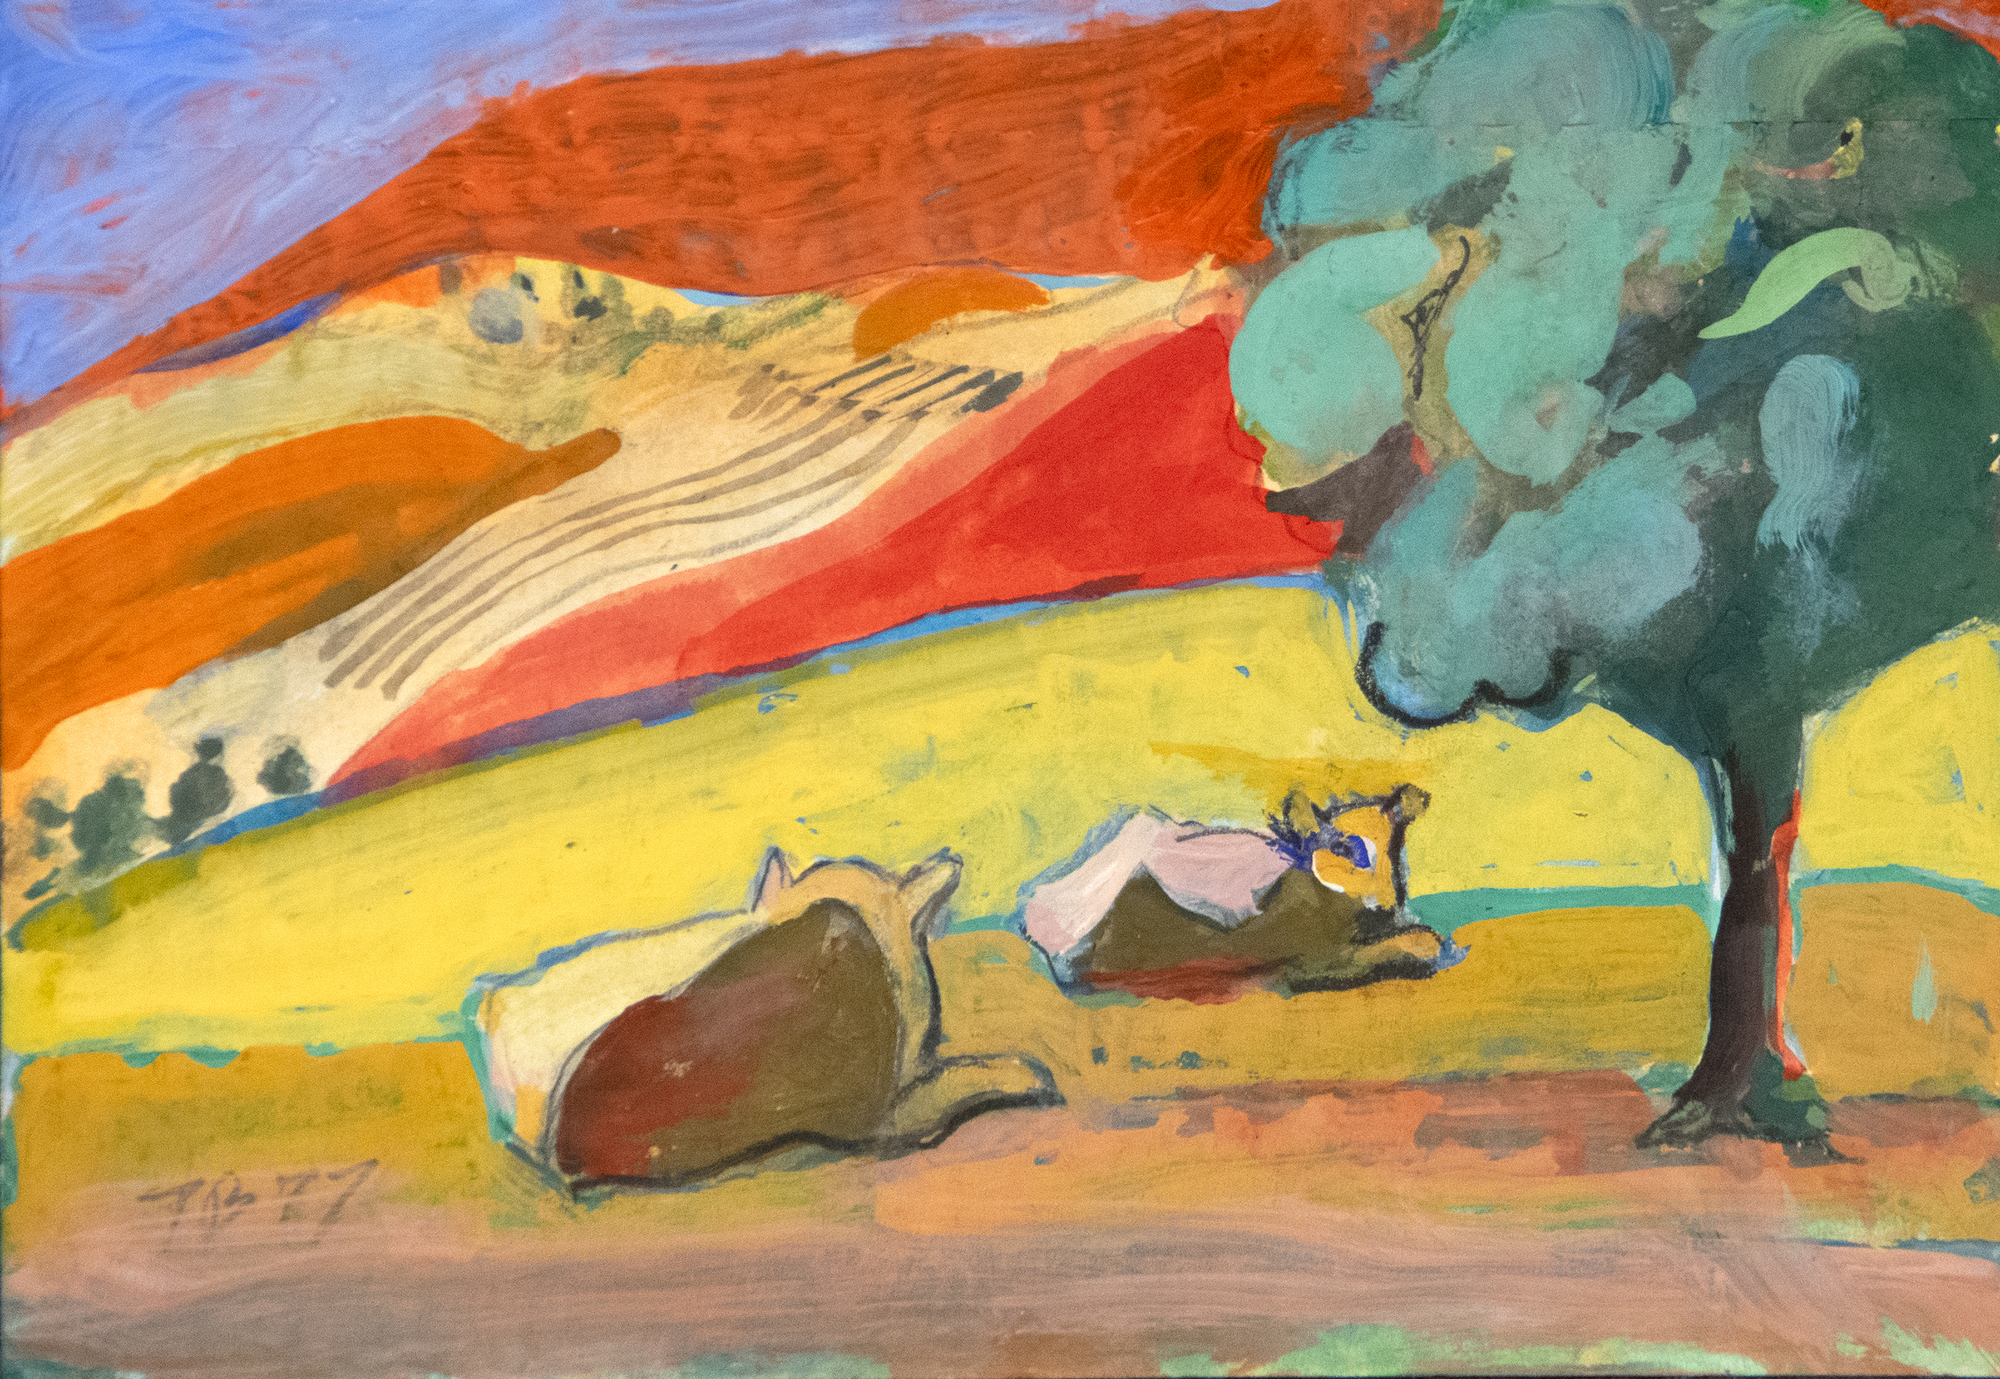 WILLIAM THEOPHILUS BROWN - Untitled (2 Cows) - acrylic on paper - 6 x 4 1/2 in.